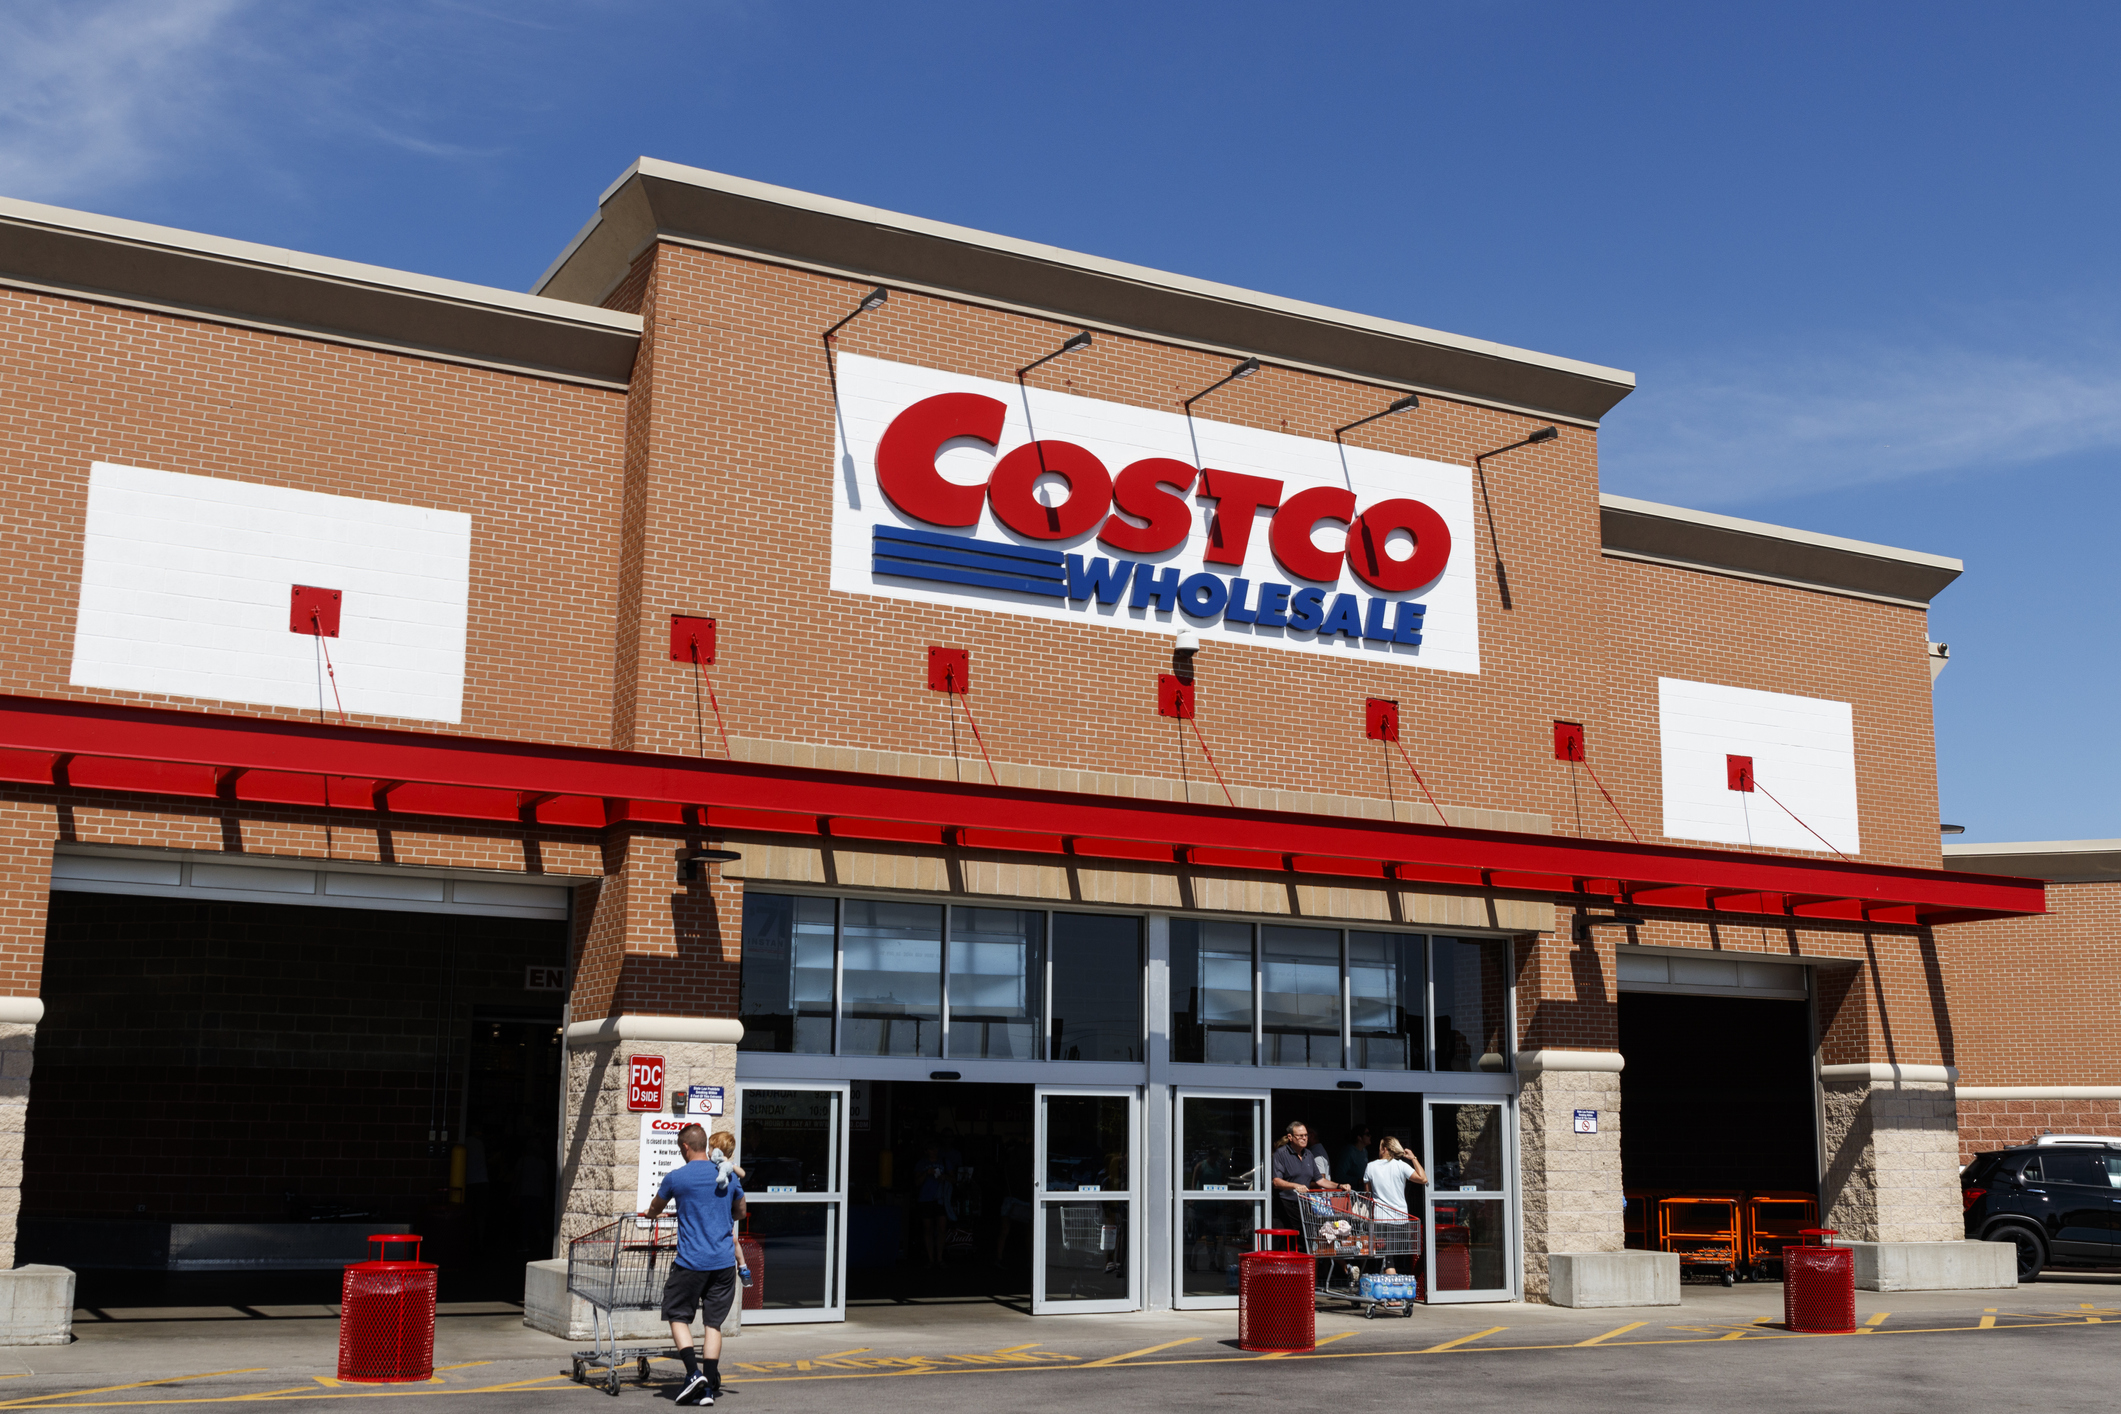 Unpaid wages and overtime lawyer against Costco